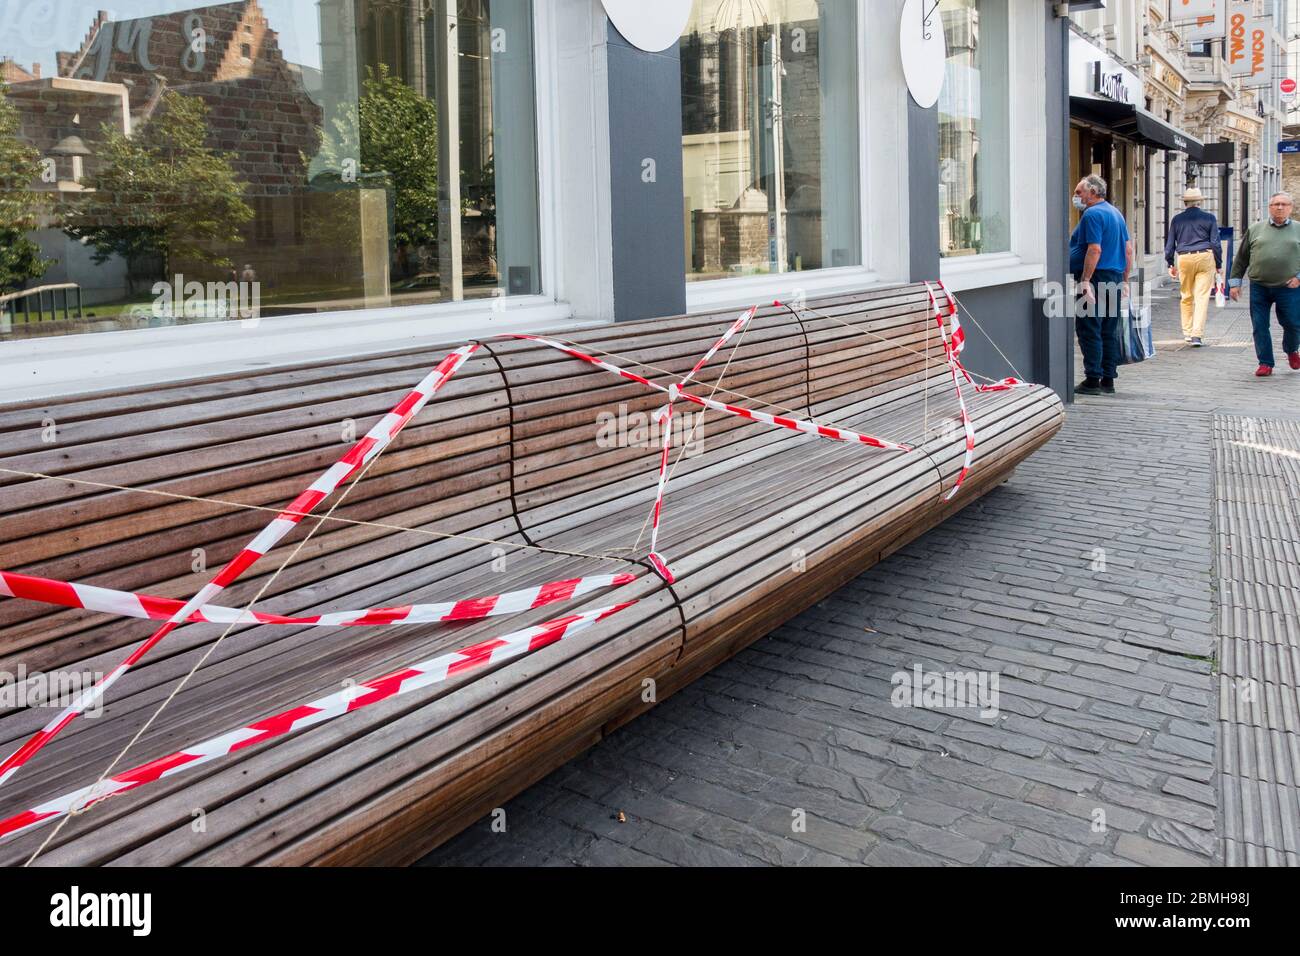 Public bench closed and sealed off with tape to prevent sitting due to 2020 COVID-19 / coronavirus / corona virus pandemic in the city Ghent, Belgium Stock Photo